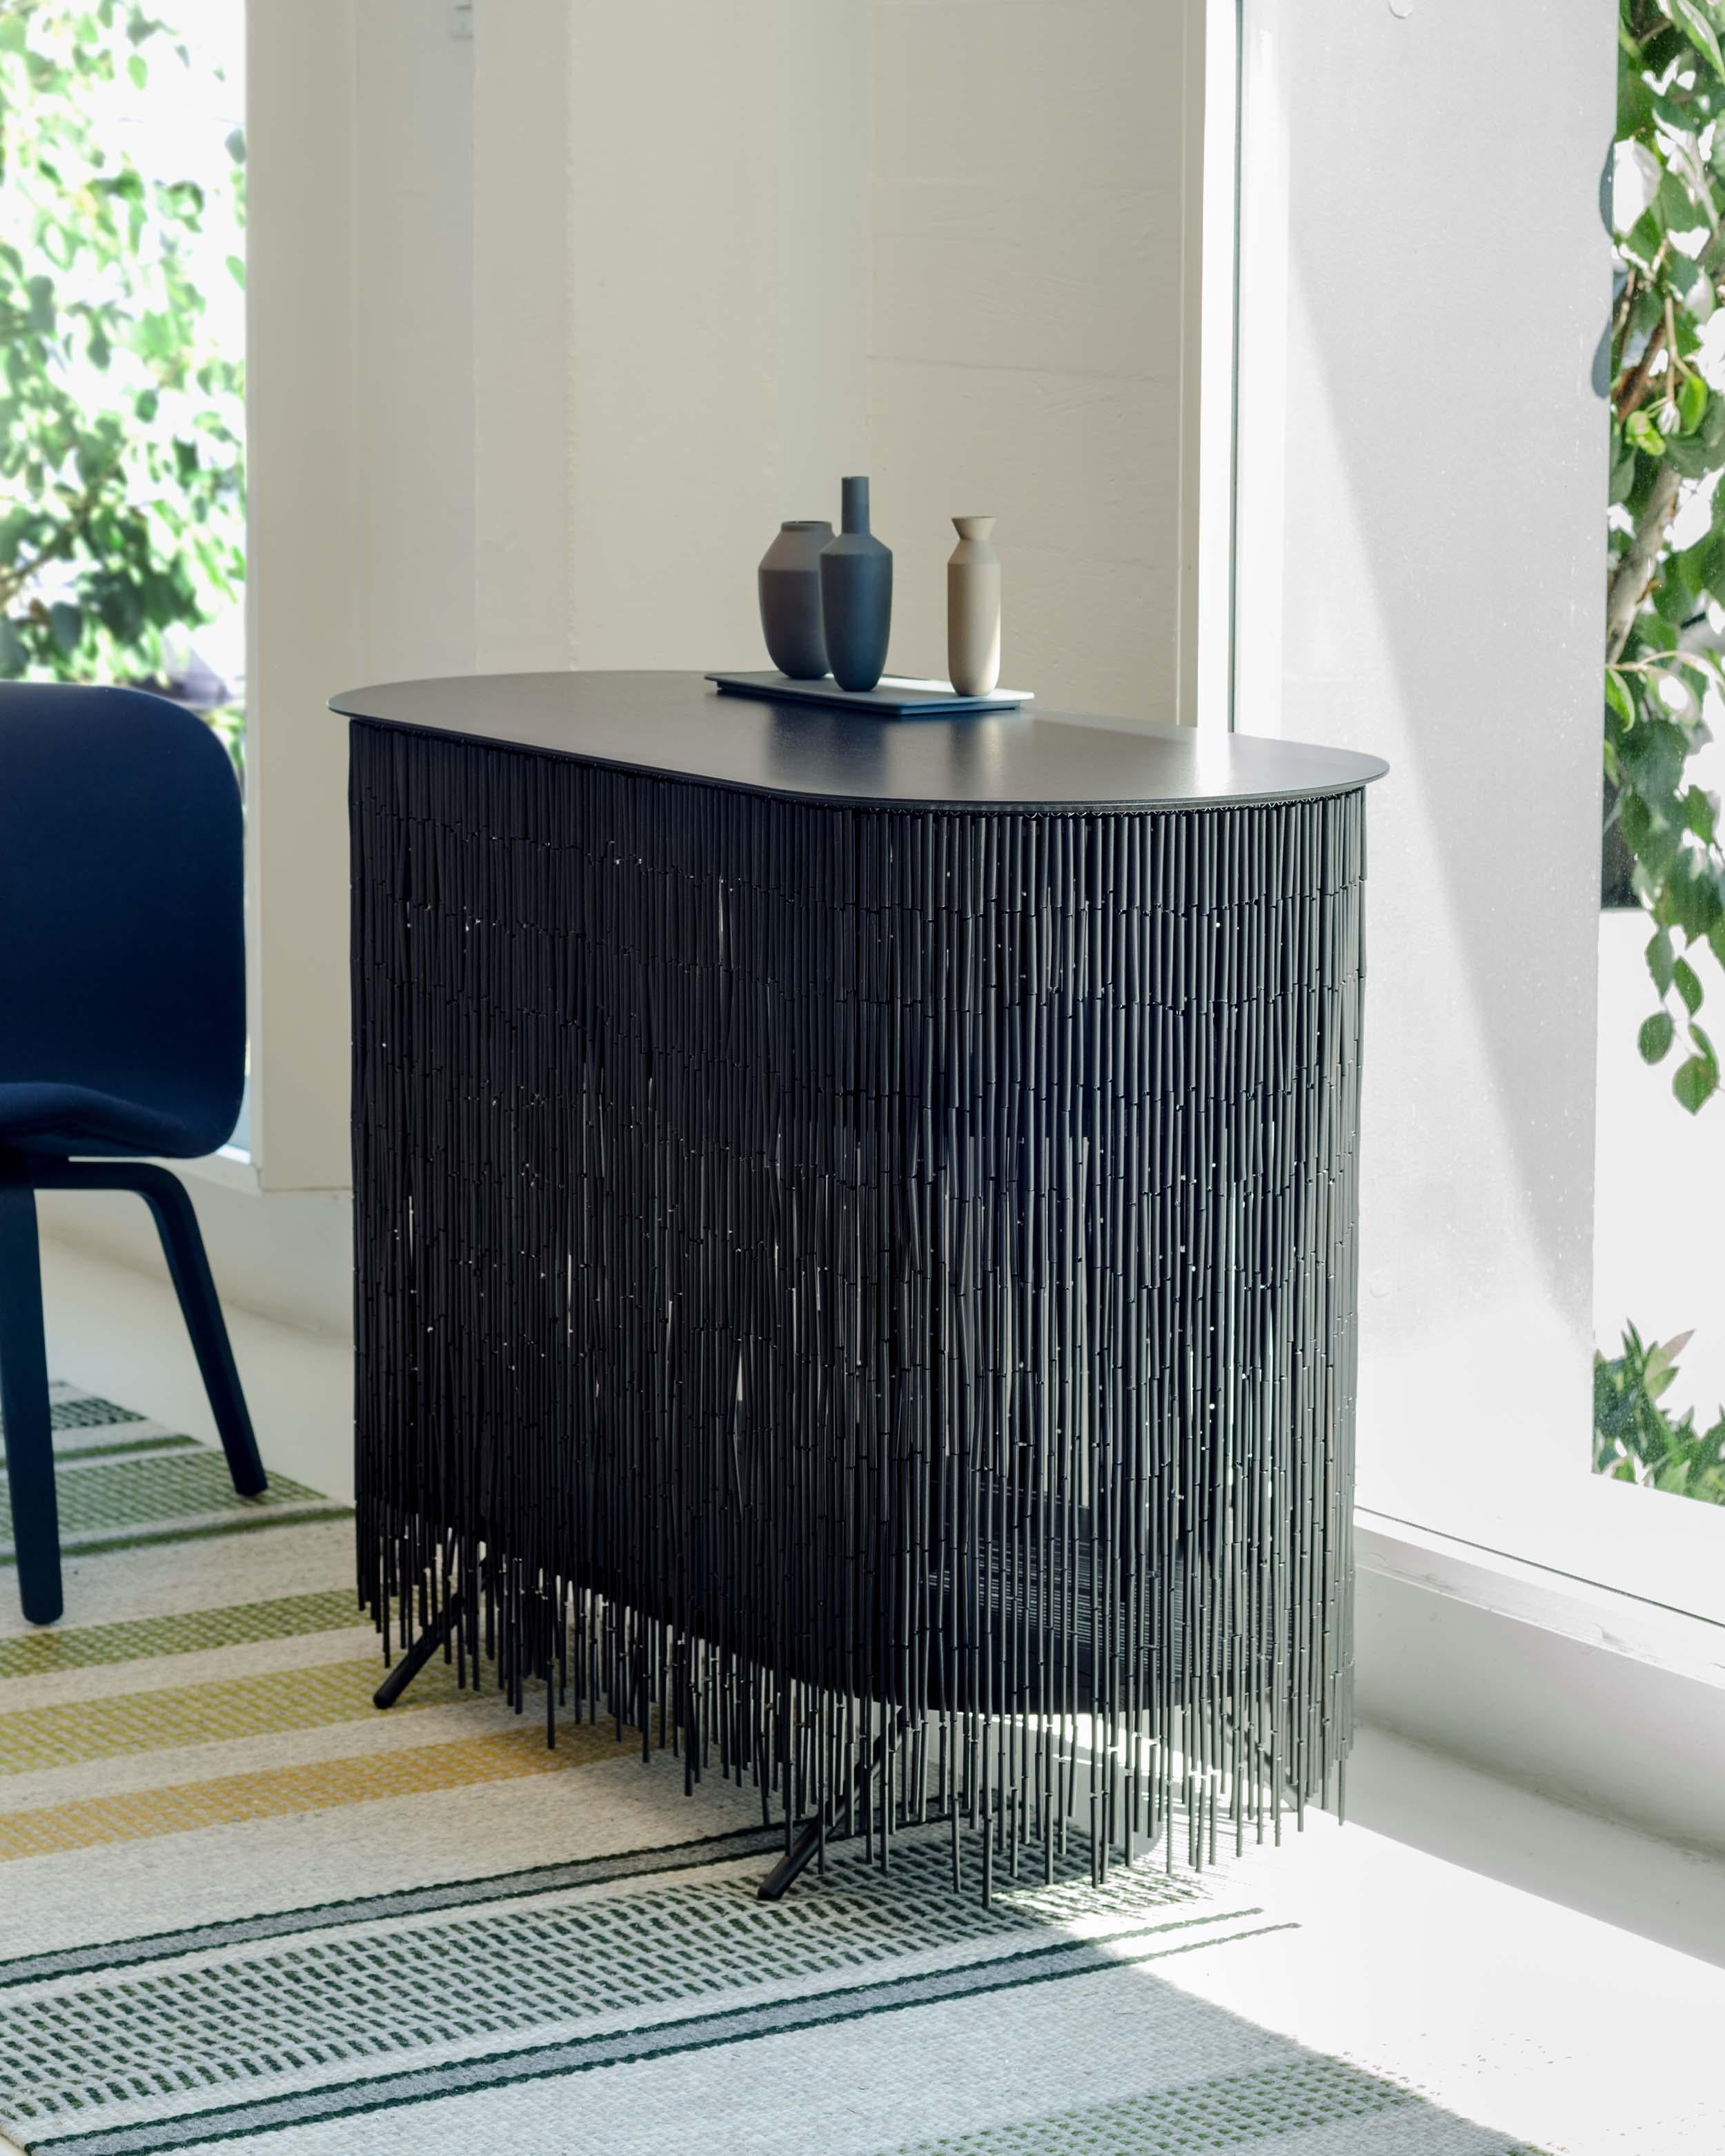 Keefer is a credenza that alludes to the objects stored within its shelves, yet obscures their identity through its bamboo-beaded skirt. The skirt masks the vertical supports, creating the illusion of floating shelves. The interior can be accessed